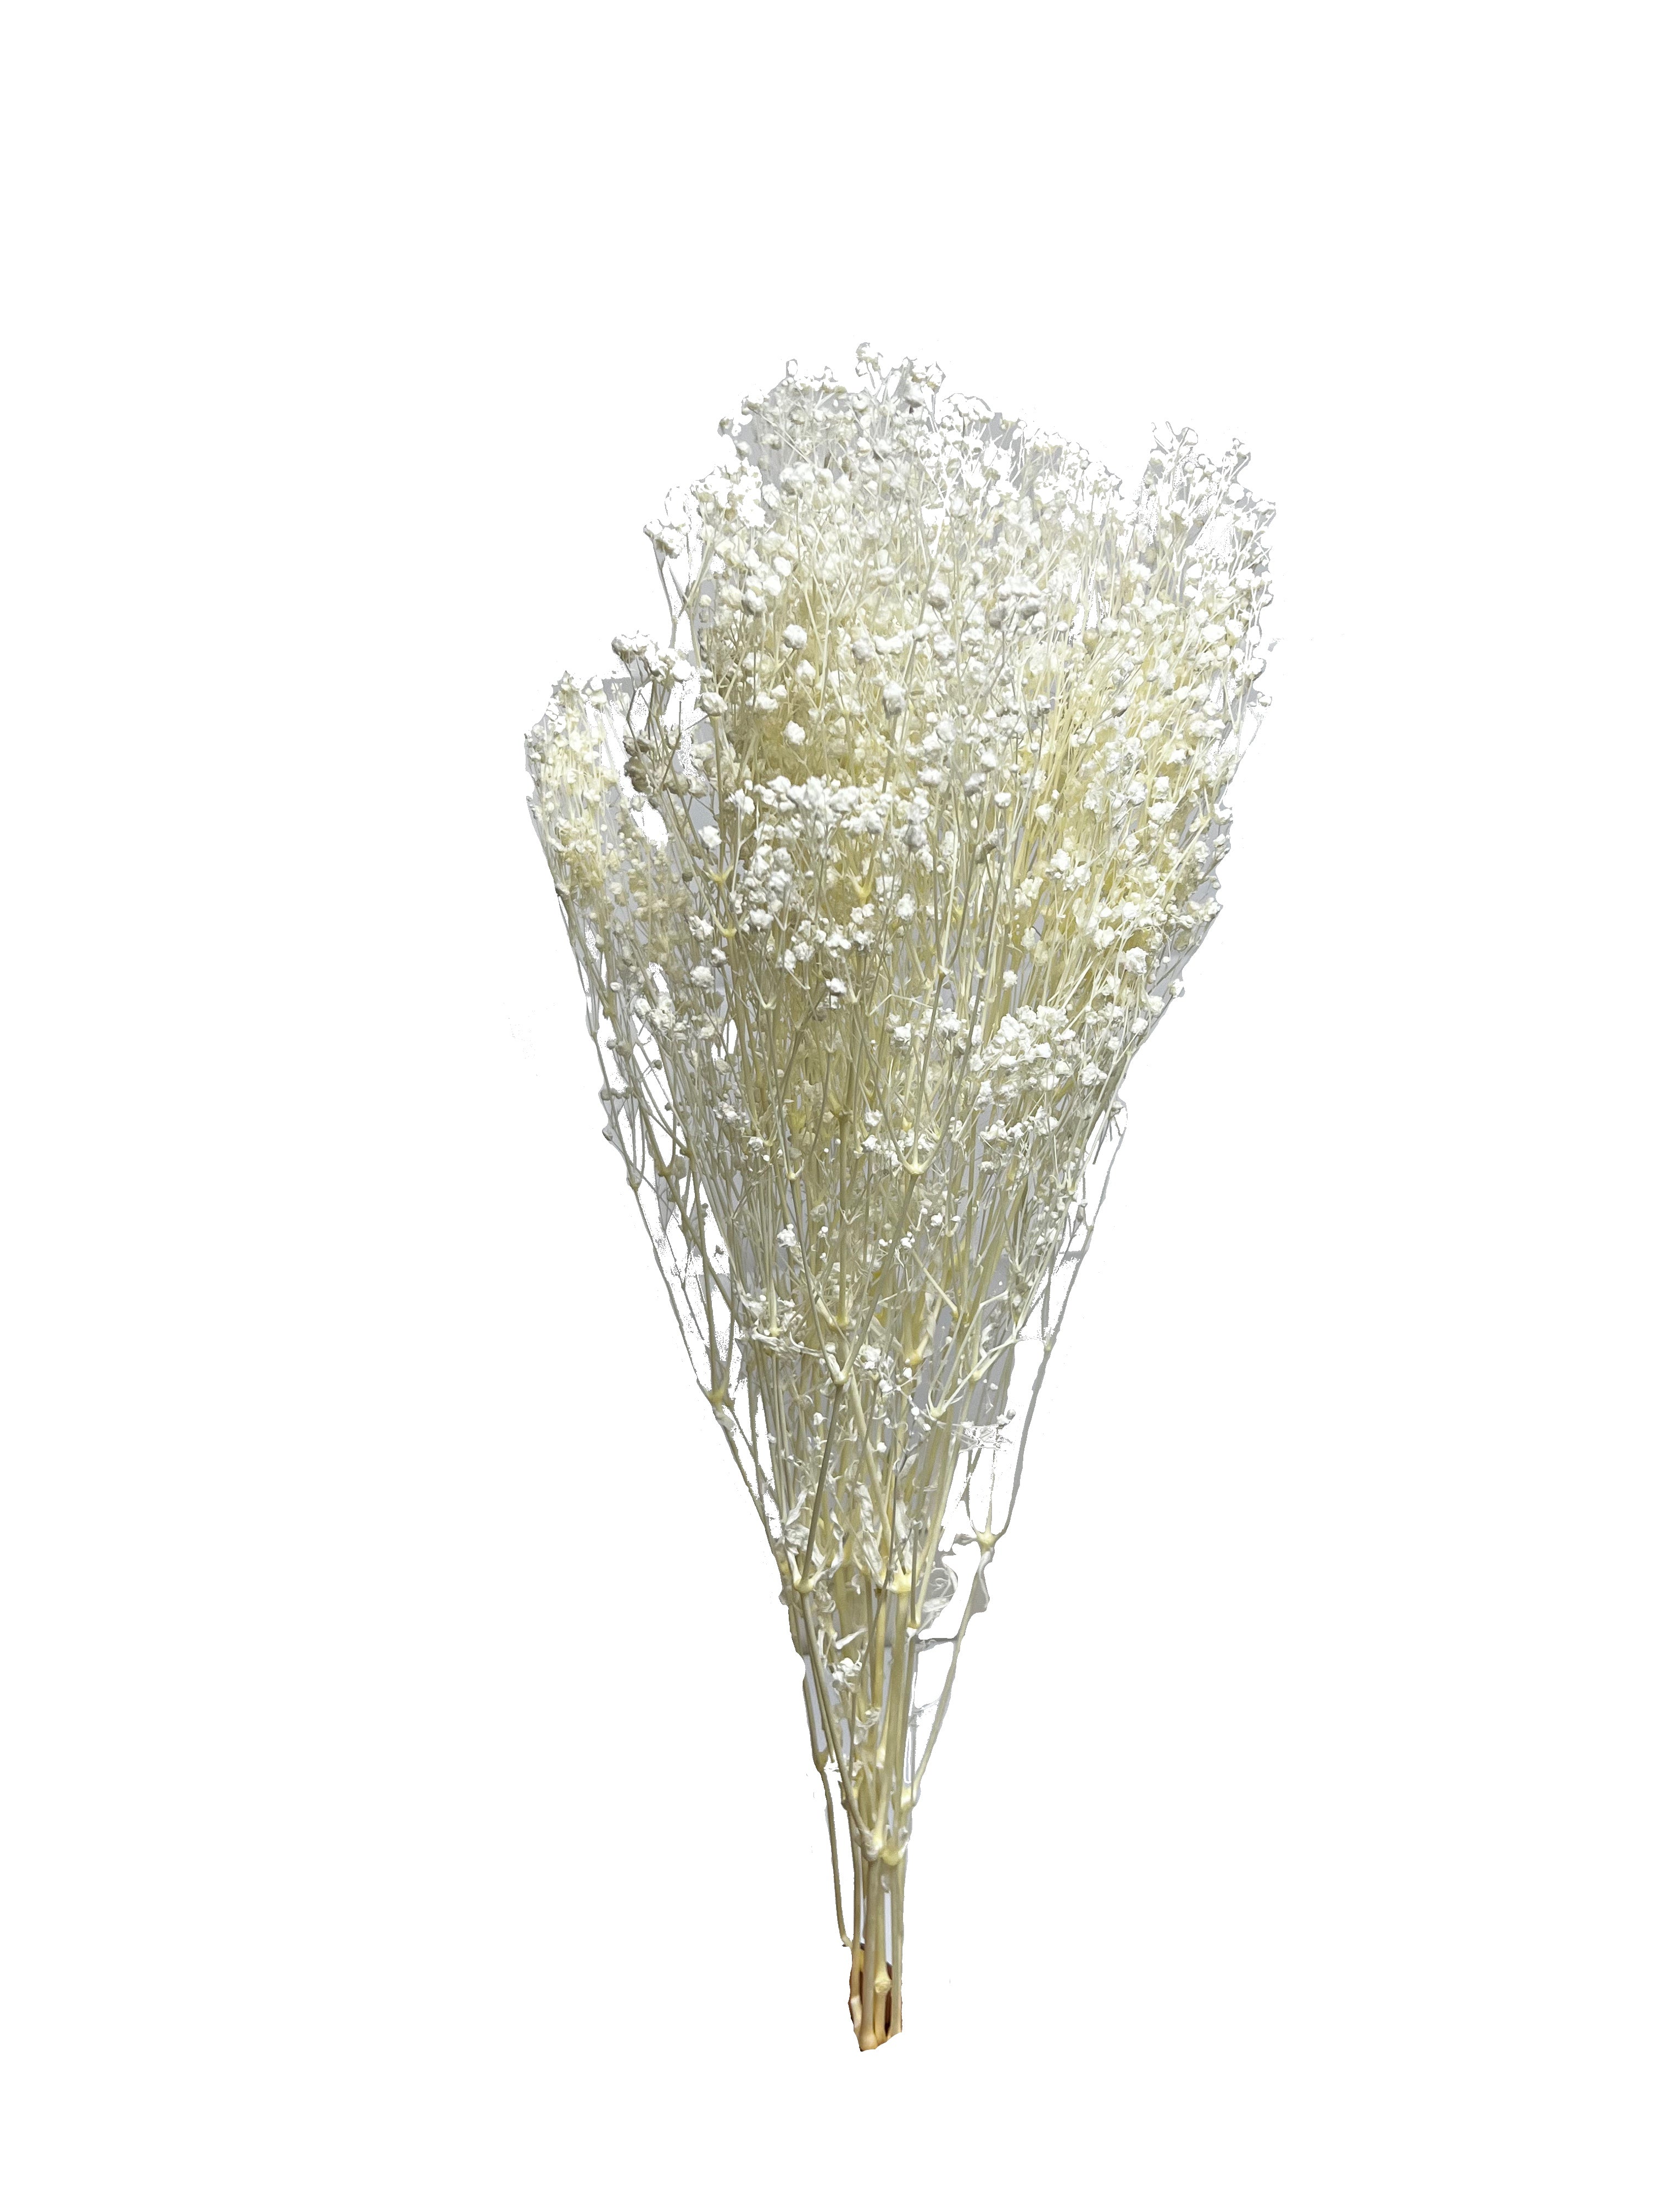 Dried & Preserved Baby's Breath (Gypsophilia) - Dry Supply